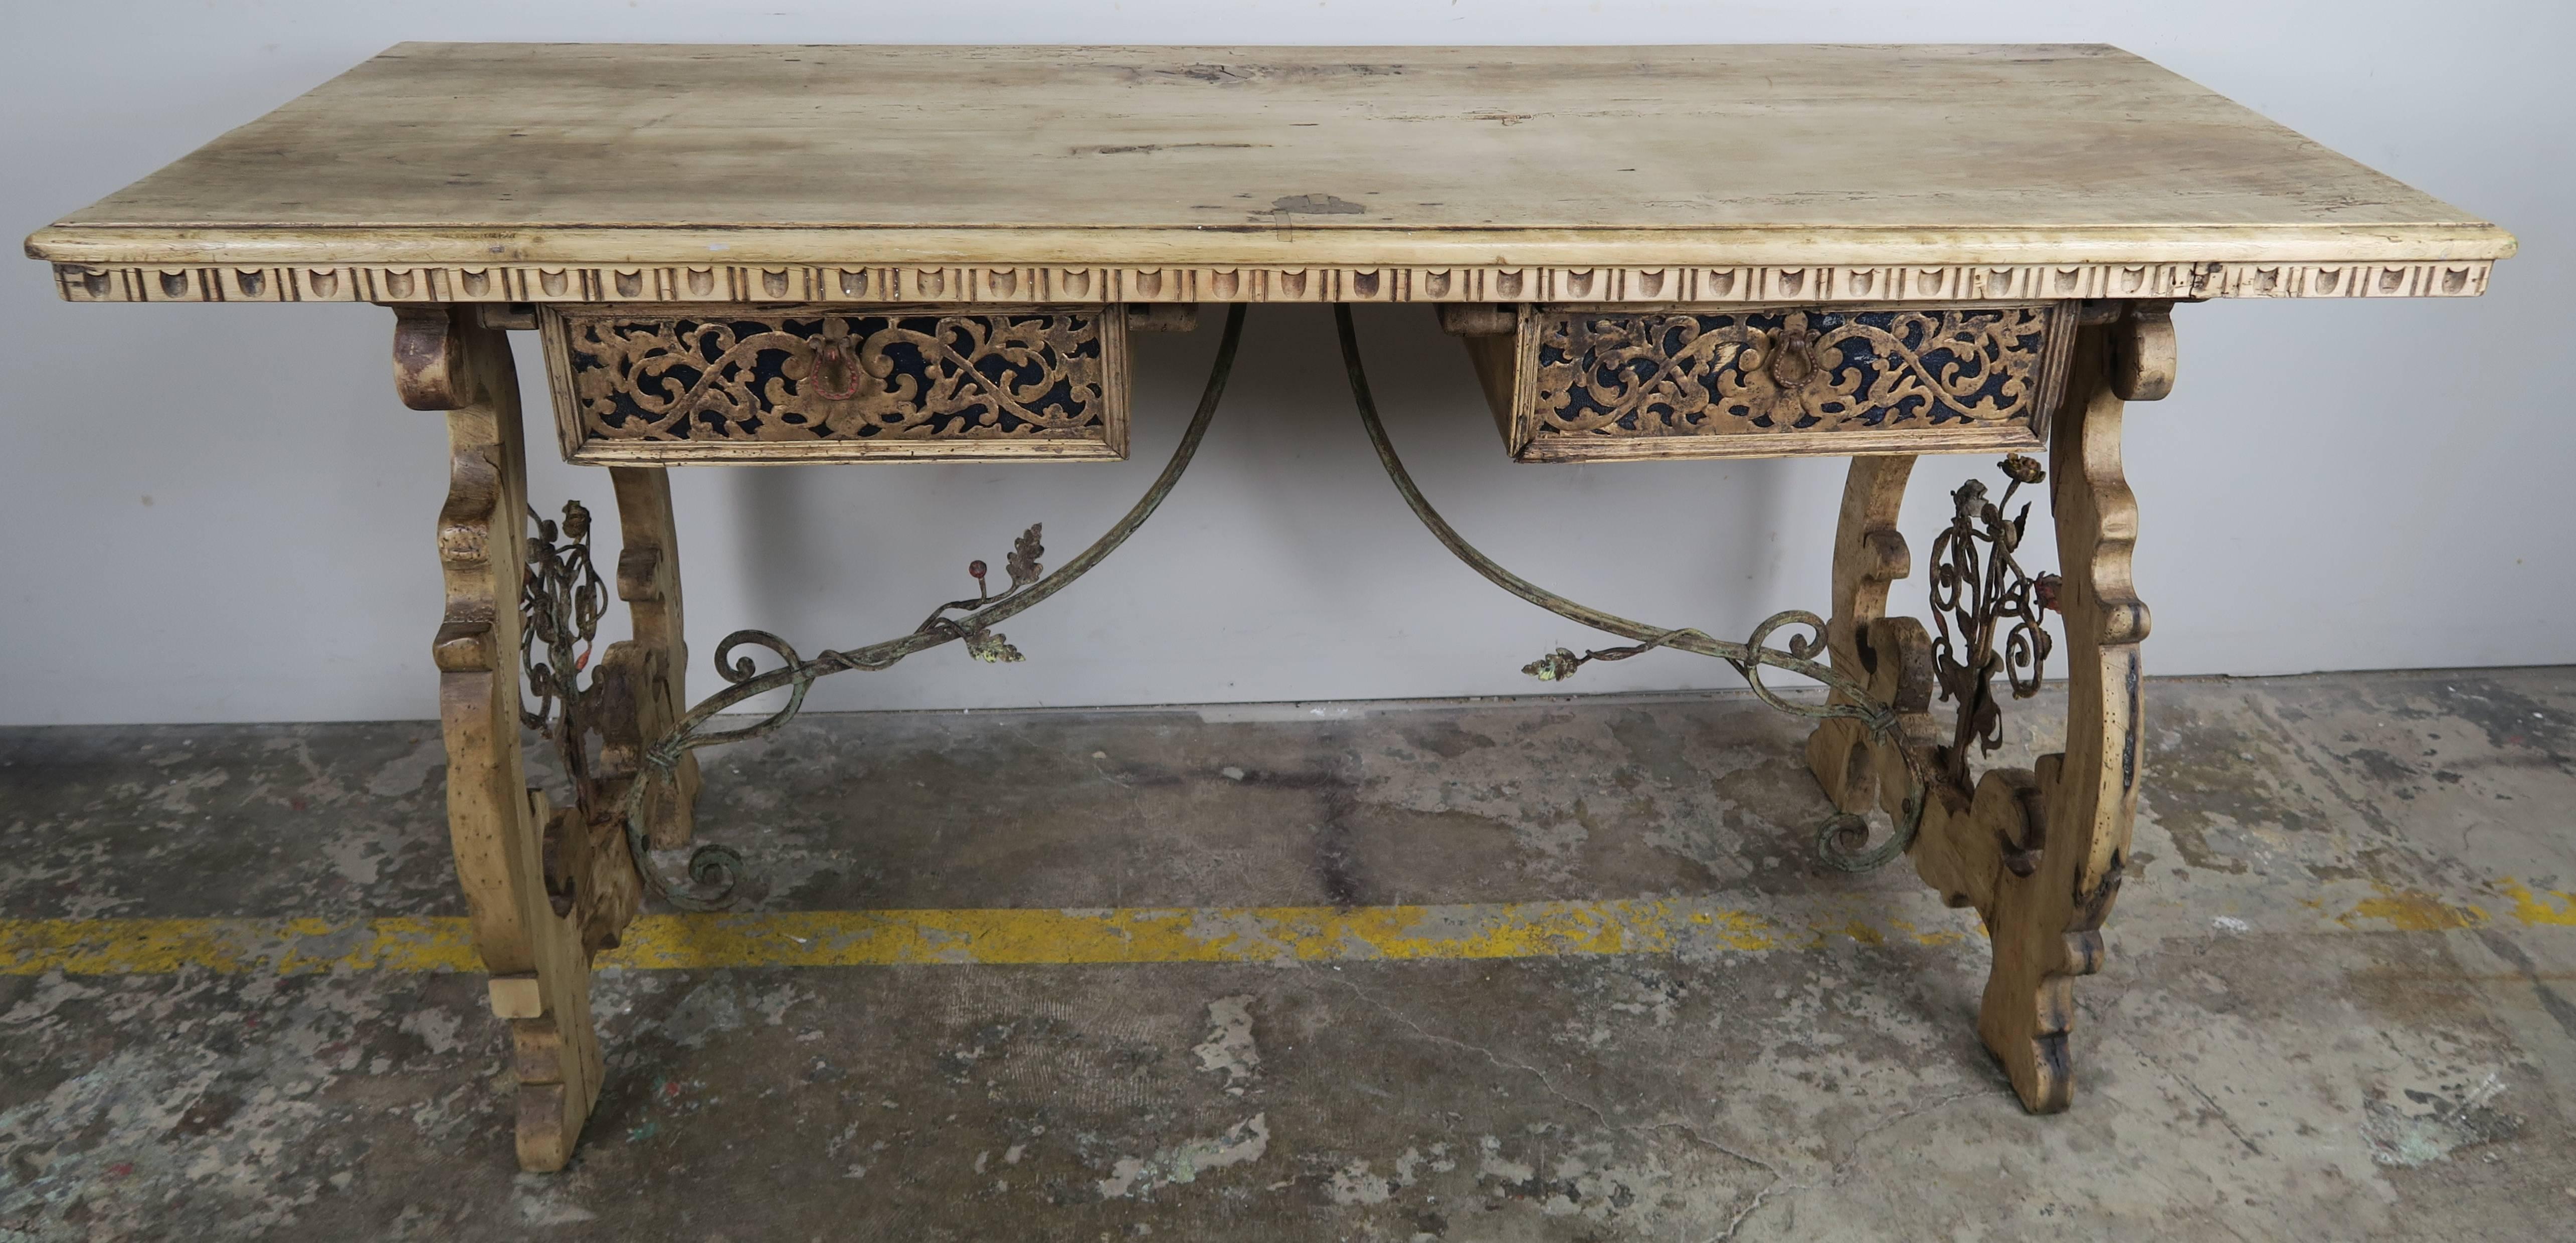 19th century bleached walnut and wrought iron desk with two drawers. Beautiful unique brass metalwork on both drawers. A wrought iron stretcher connects two pedestals depicting a hand-wrought iron bouquet of flowers at each end.